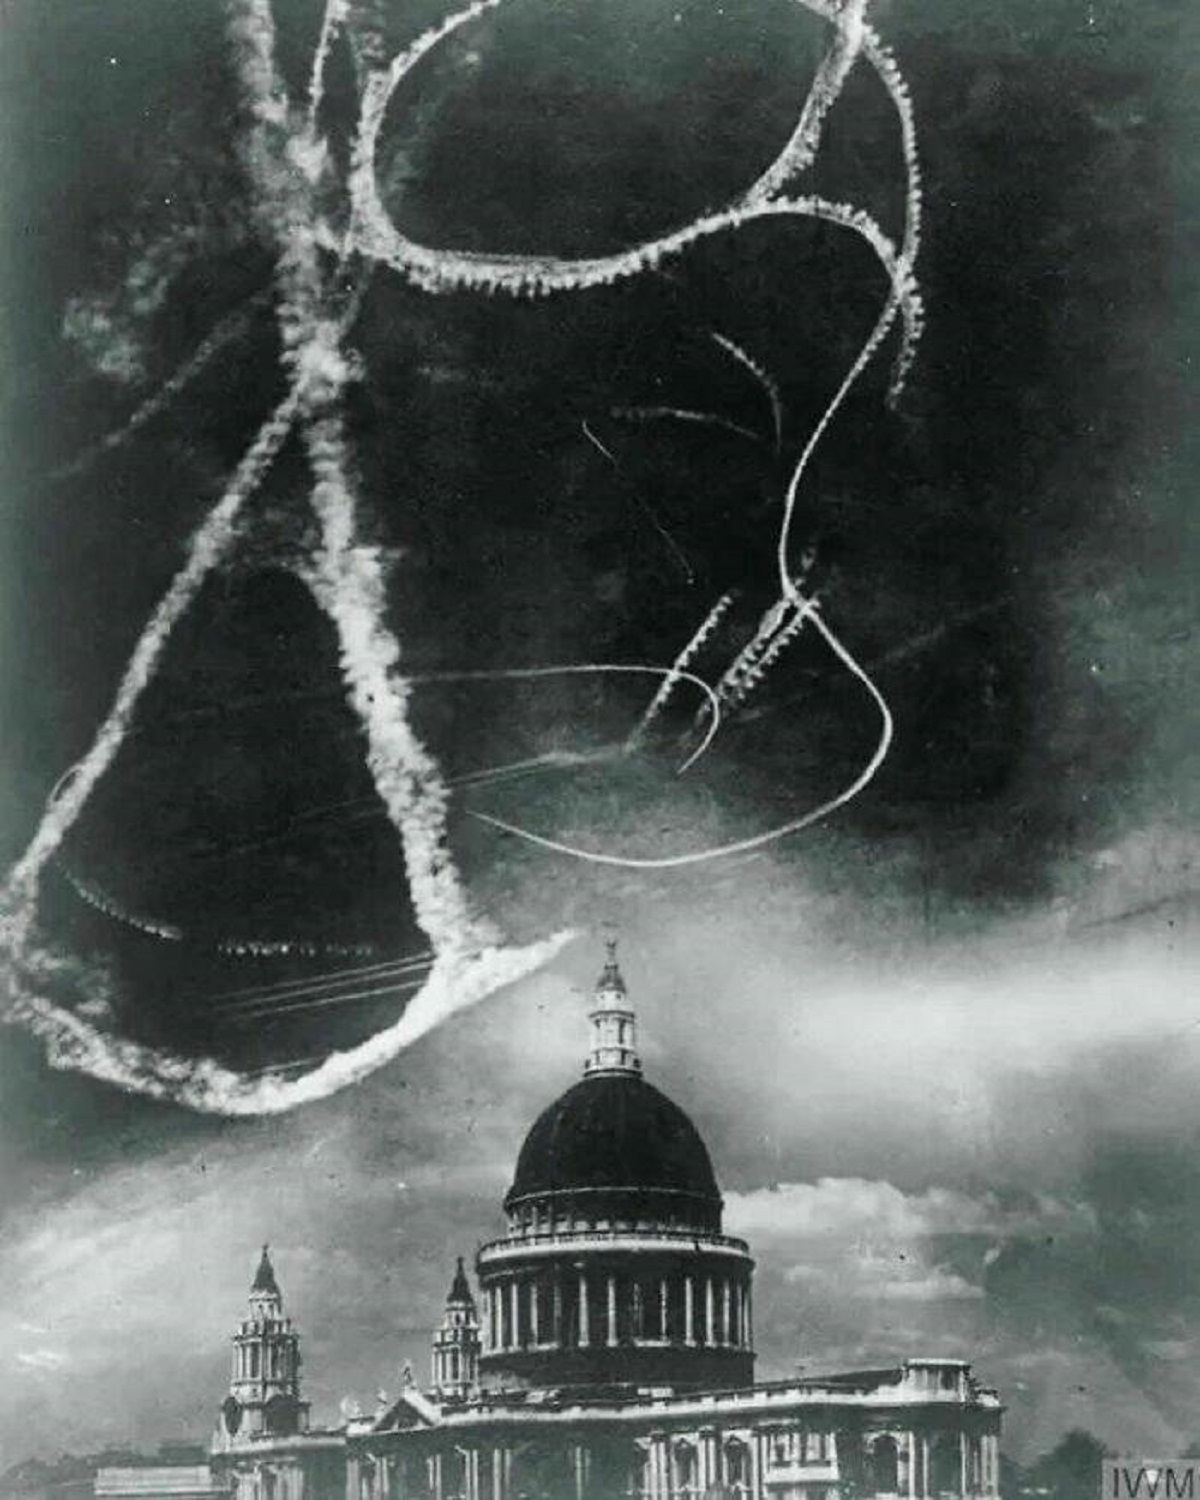 "German And British Pilots Engaged In A Dogfight Above St Paul's Cathedral During The Battle Of Britain, London, 1940, World War II"